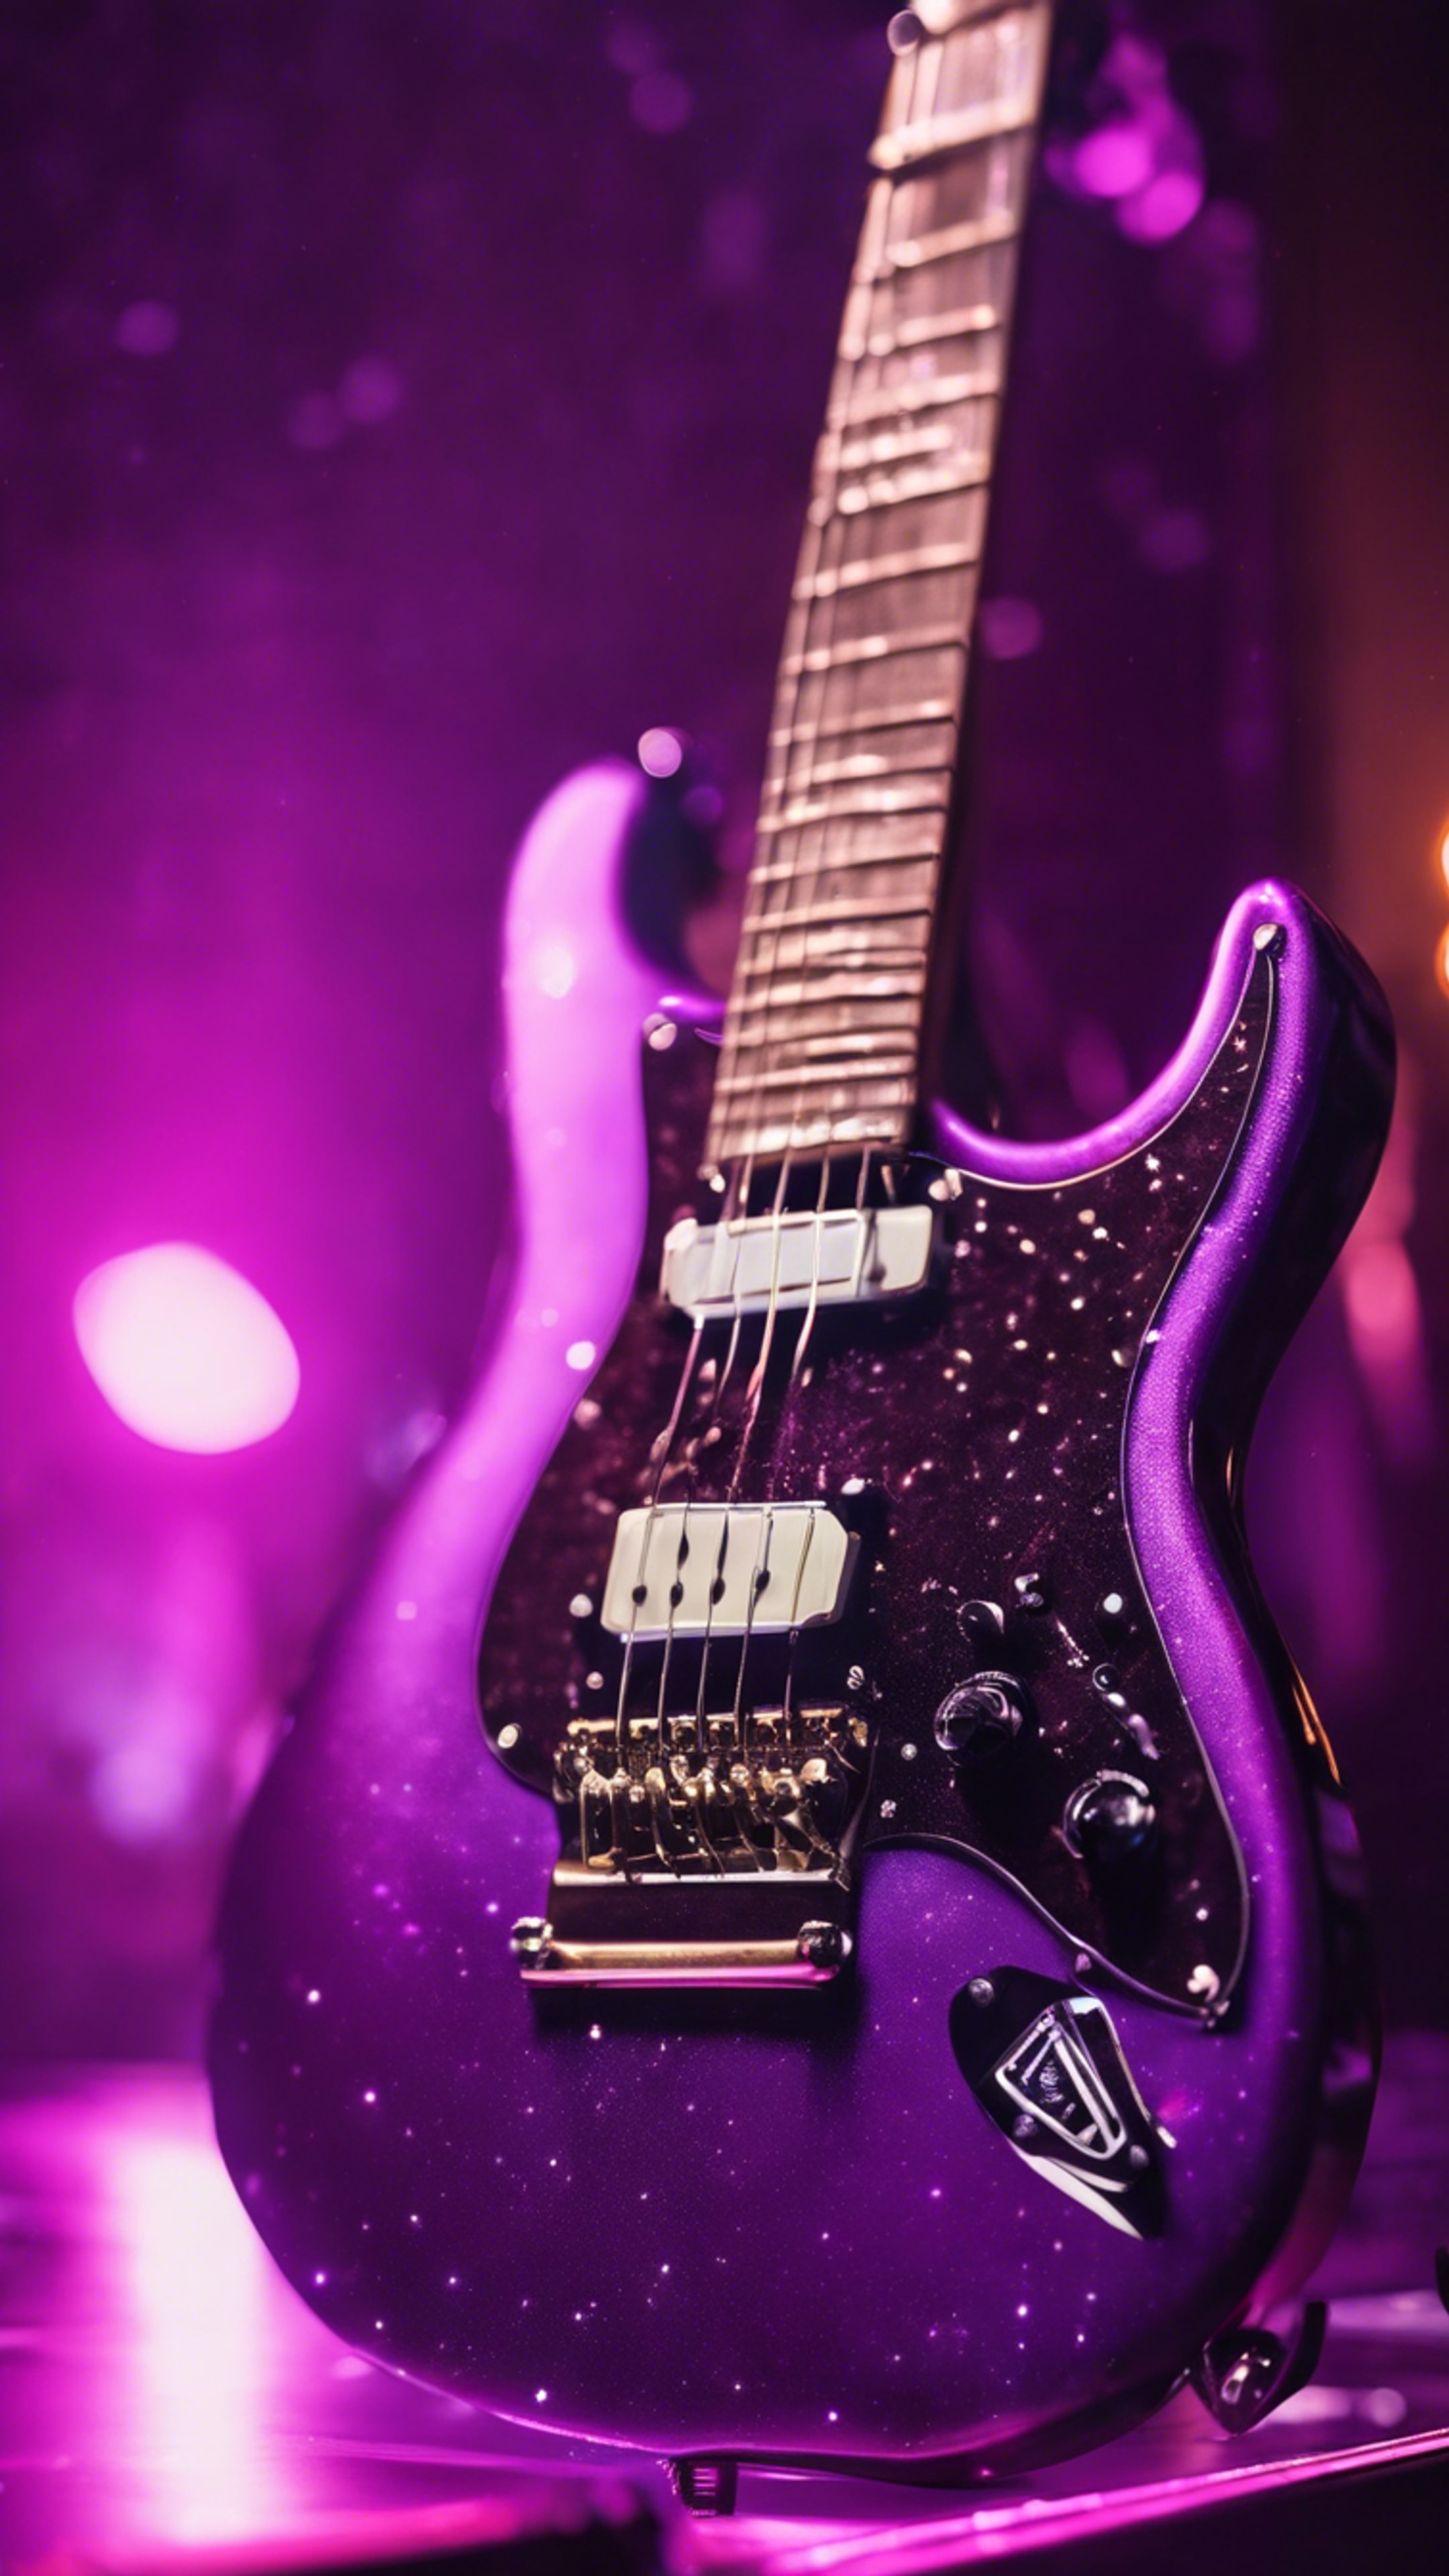 An electric guitar, finished in a glossy neon purple, under the cool stage lights of a concert.